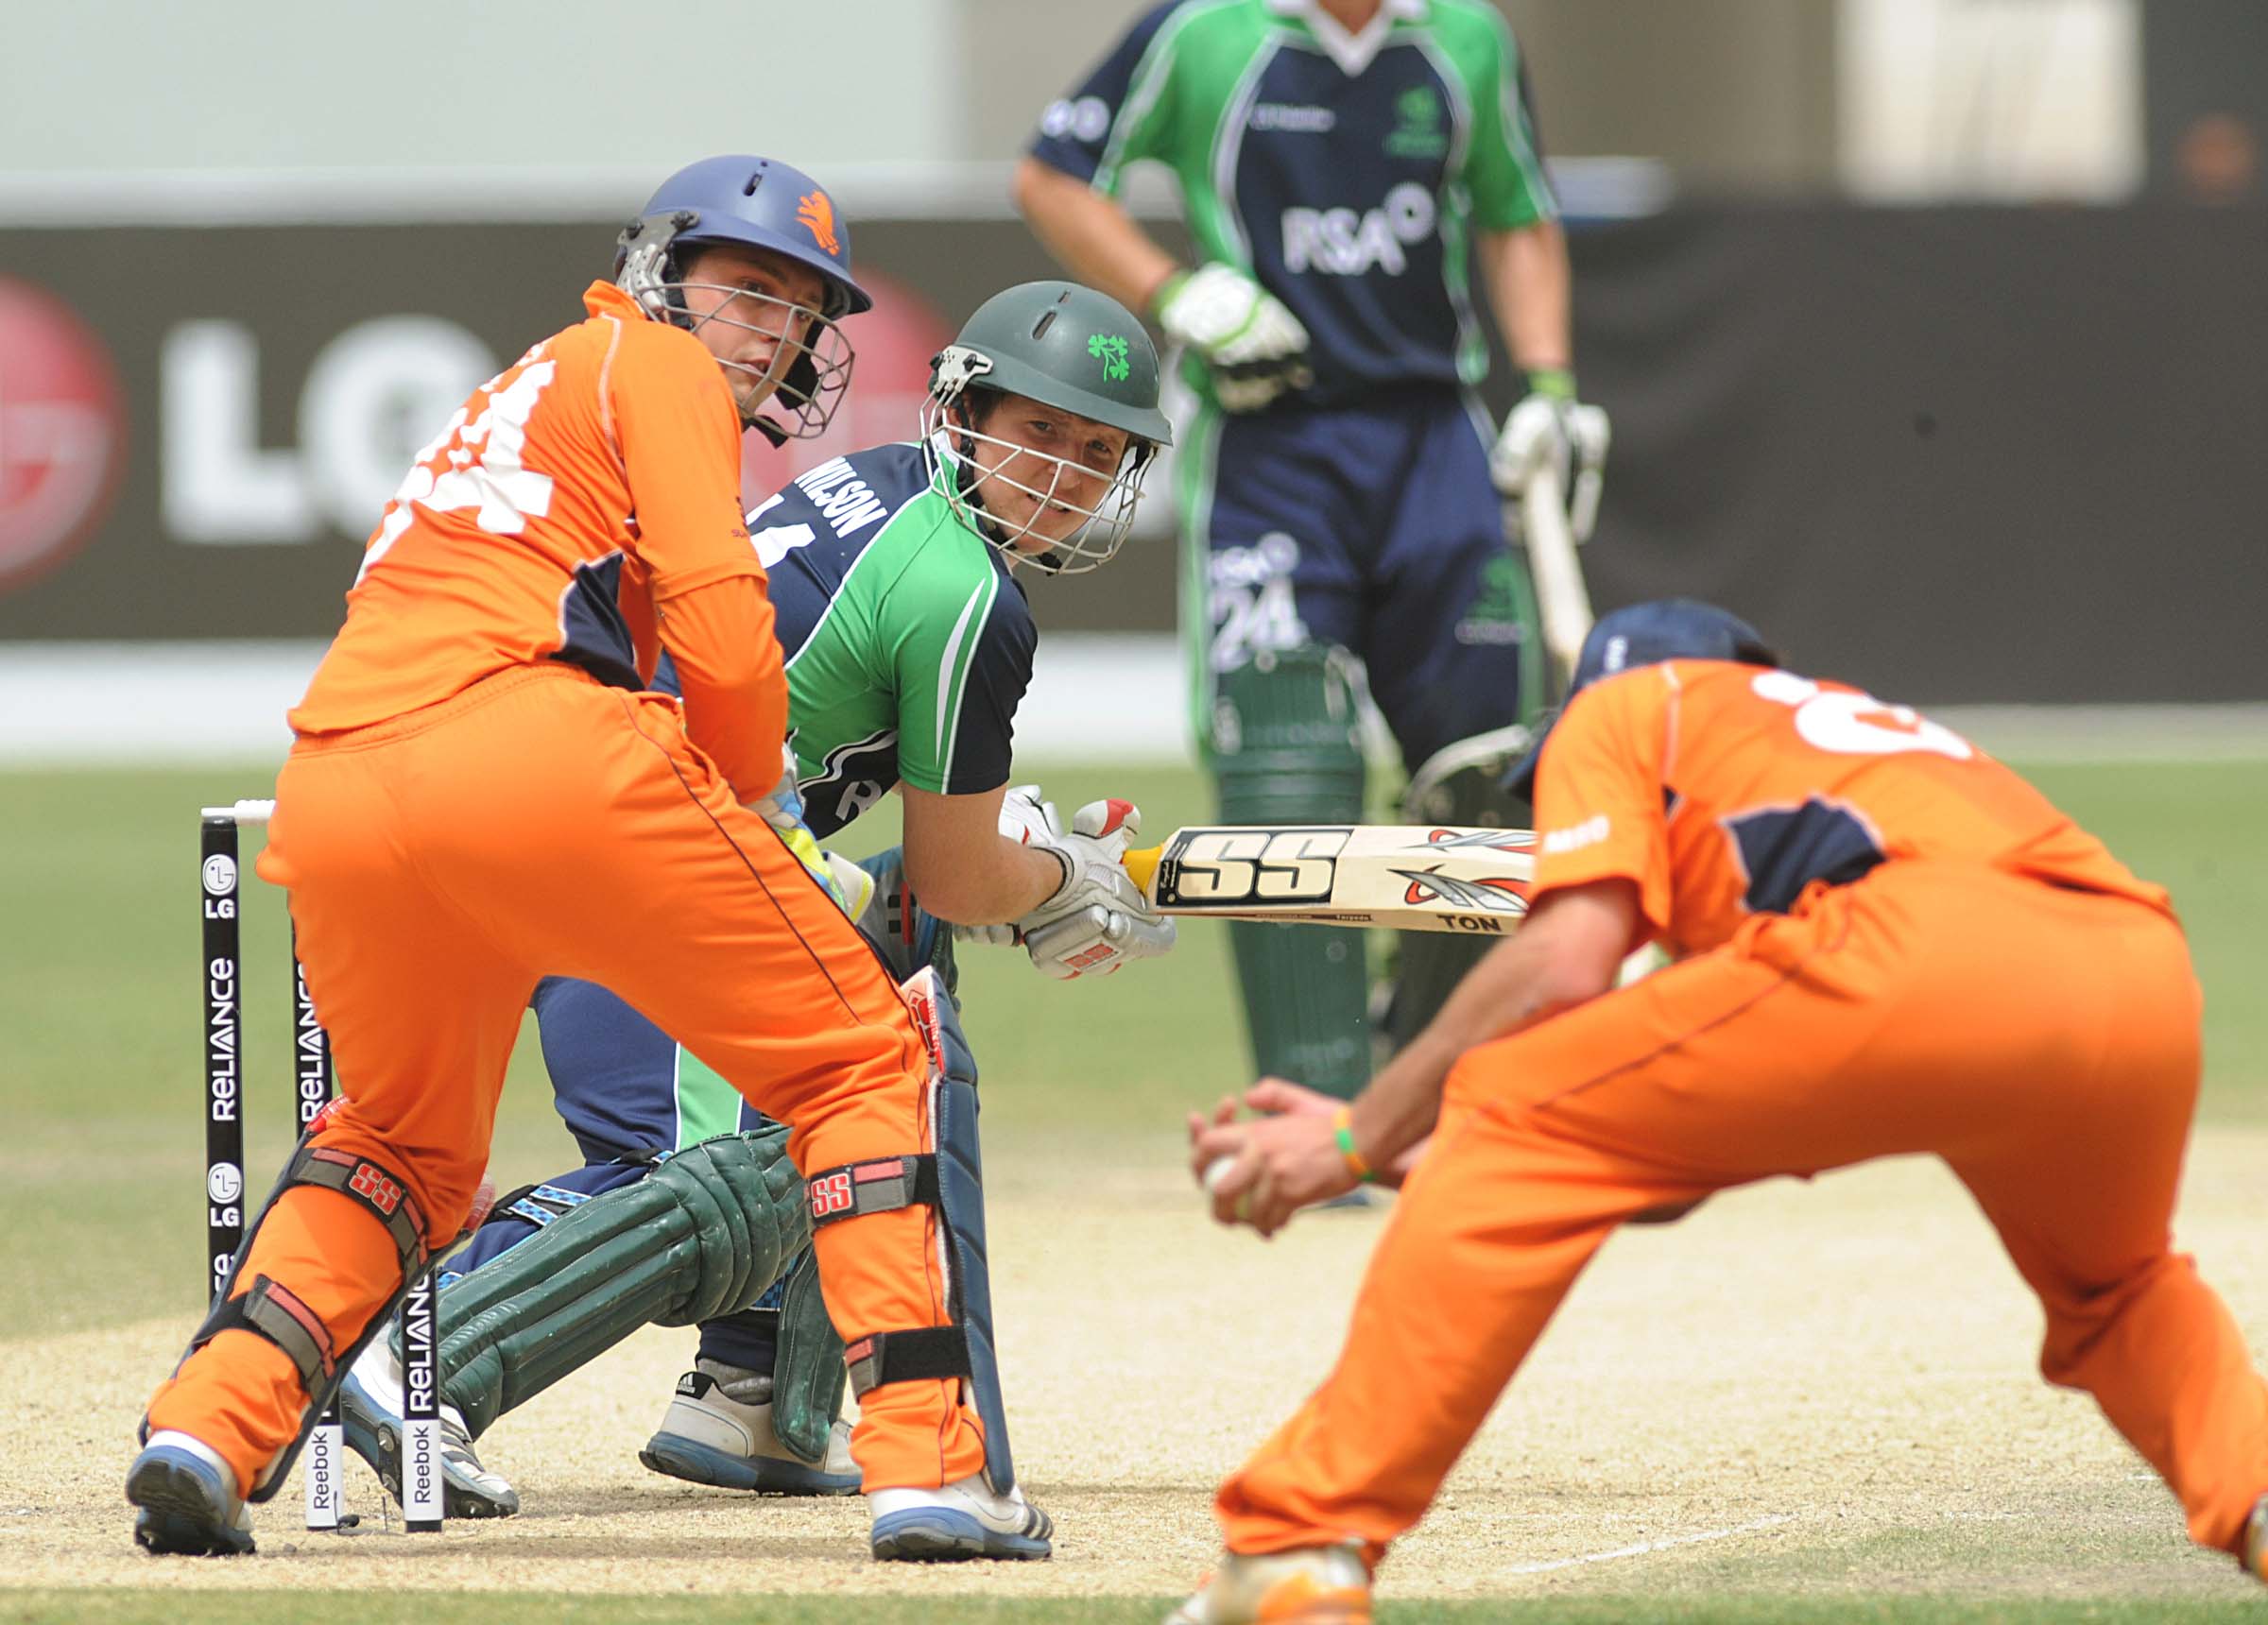 T20 World Cup Qualifier | Ireland, Netherlands and Namibia cruise to victories as qualifications look tight